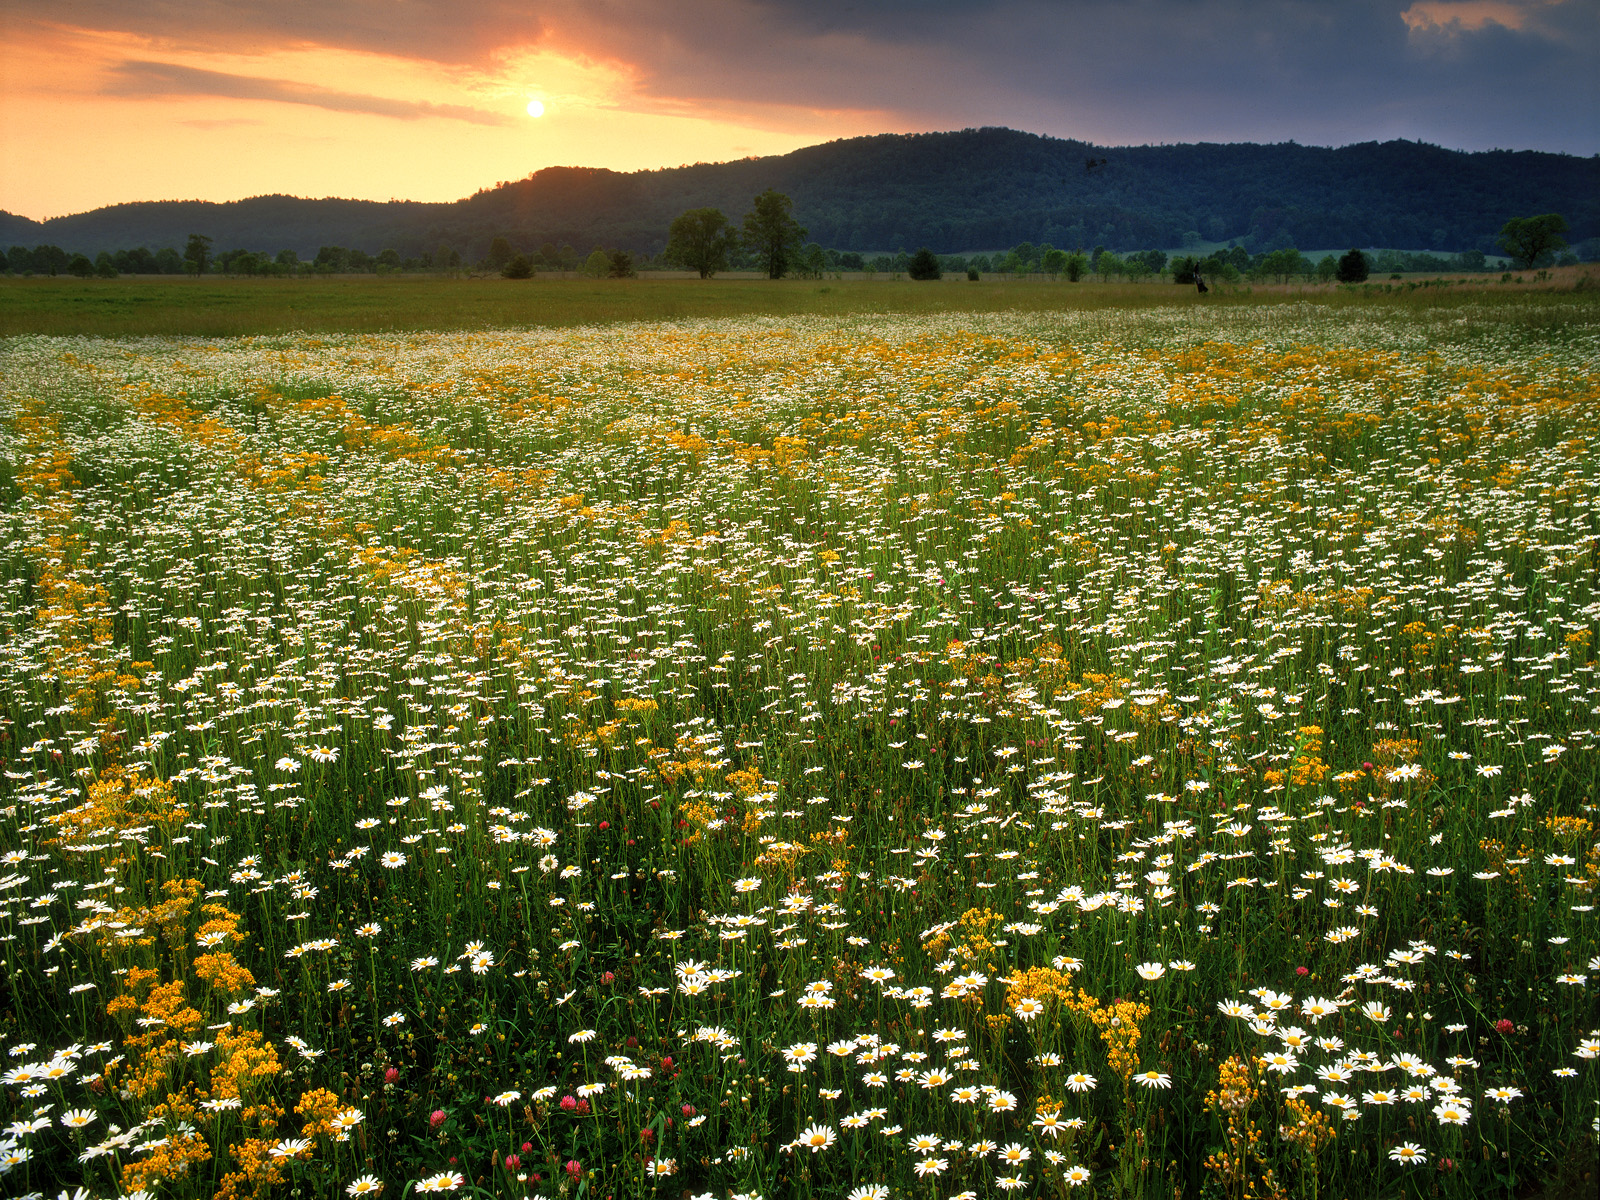 Walk through fields of happiness at these ultimate wildflower hikes